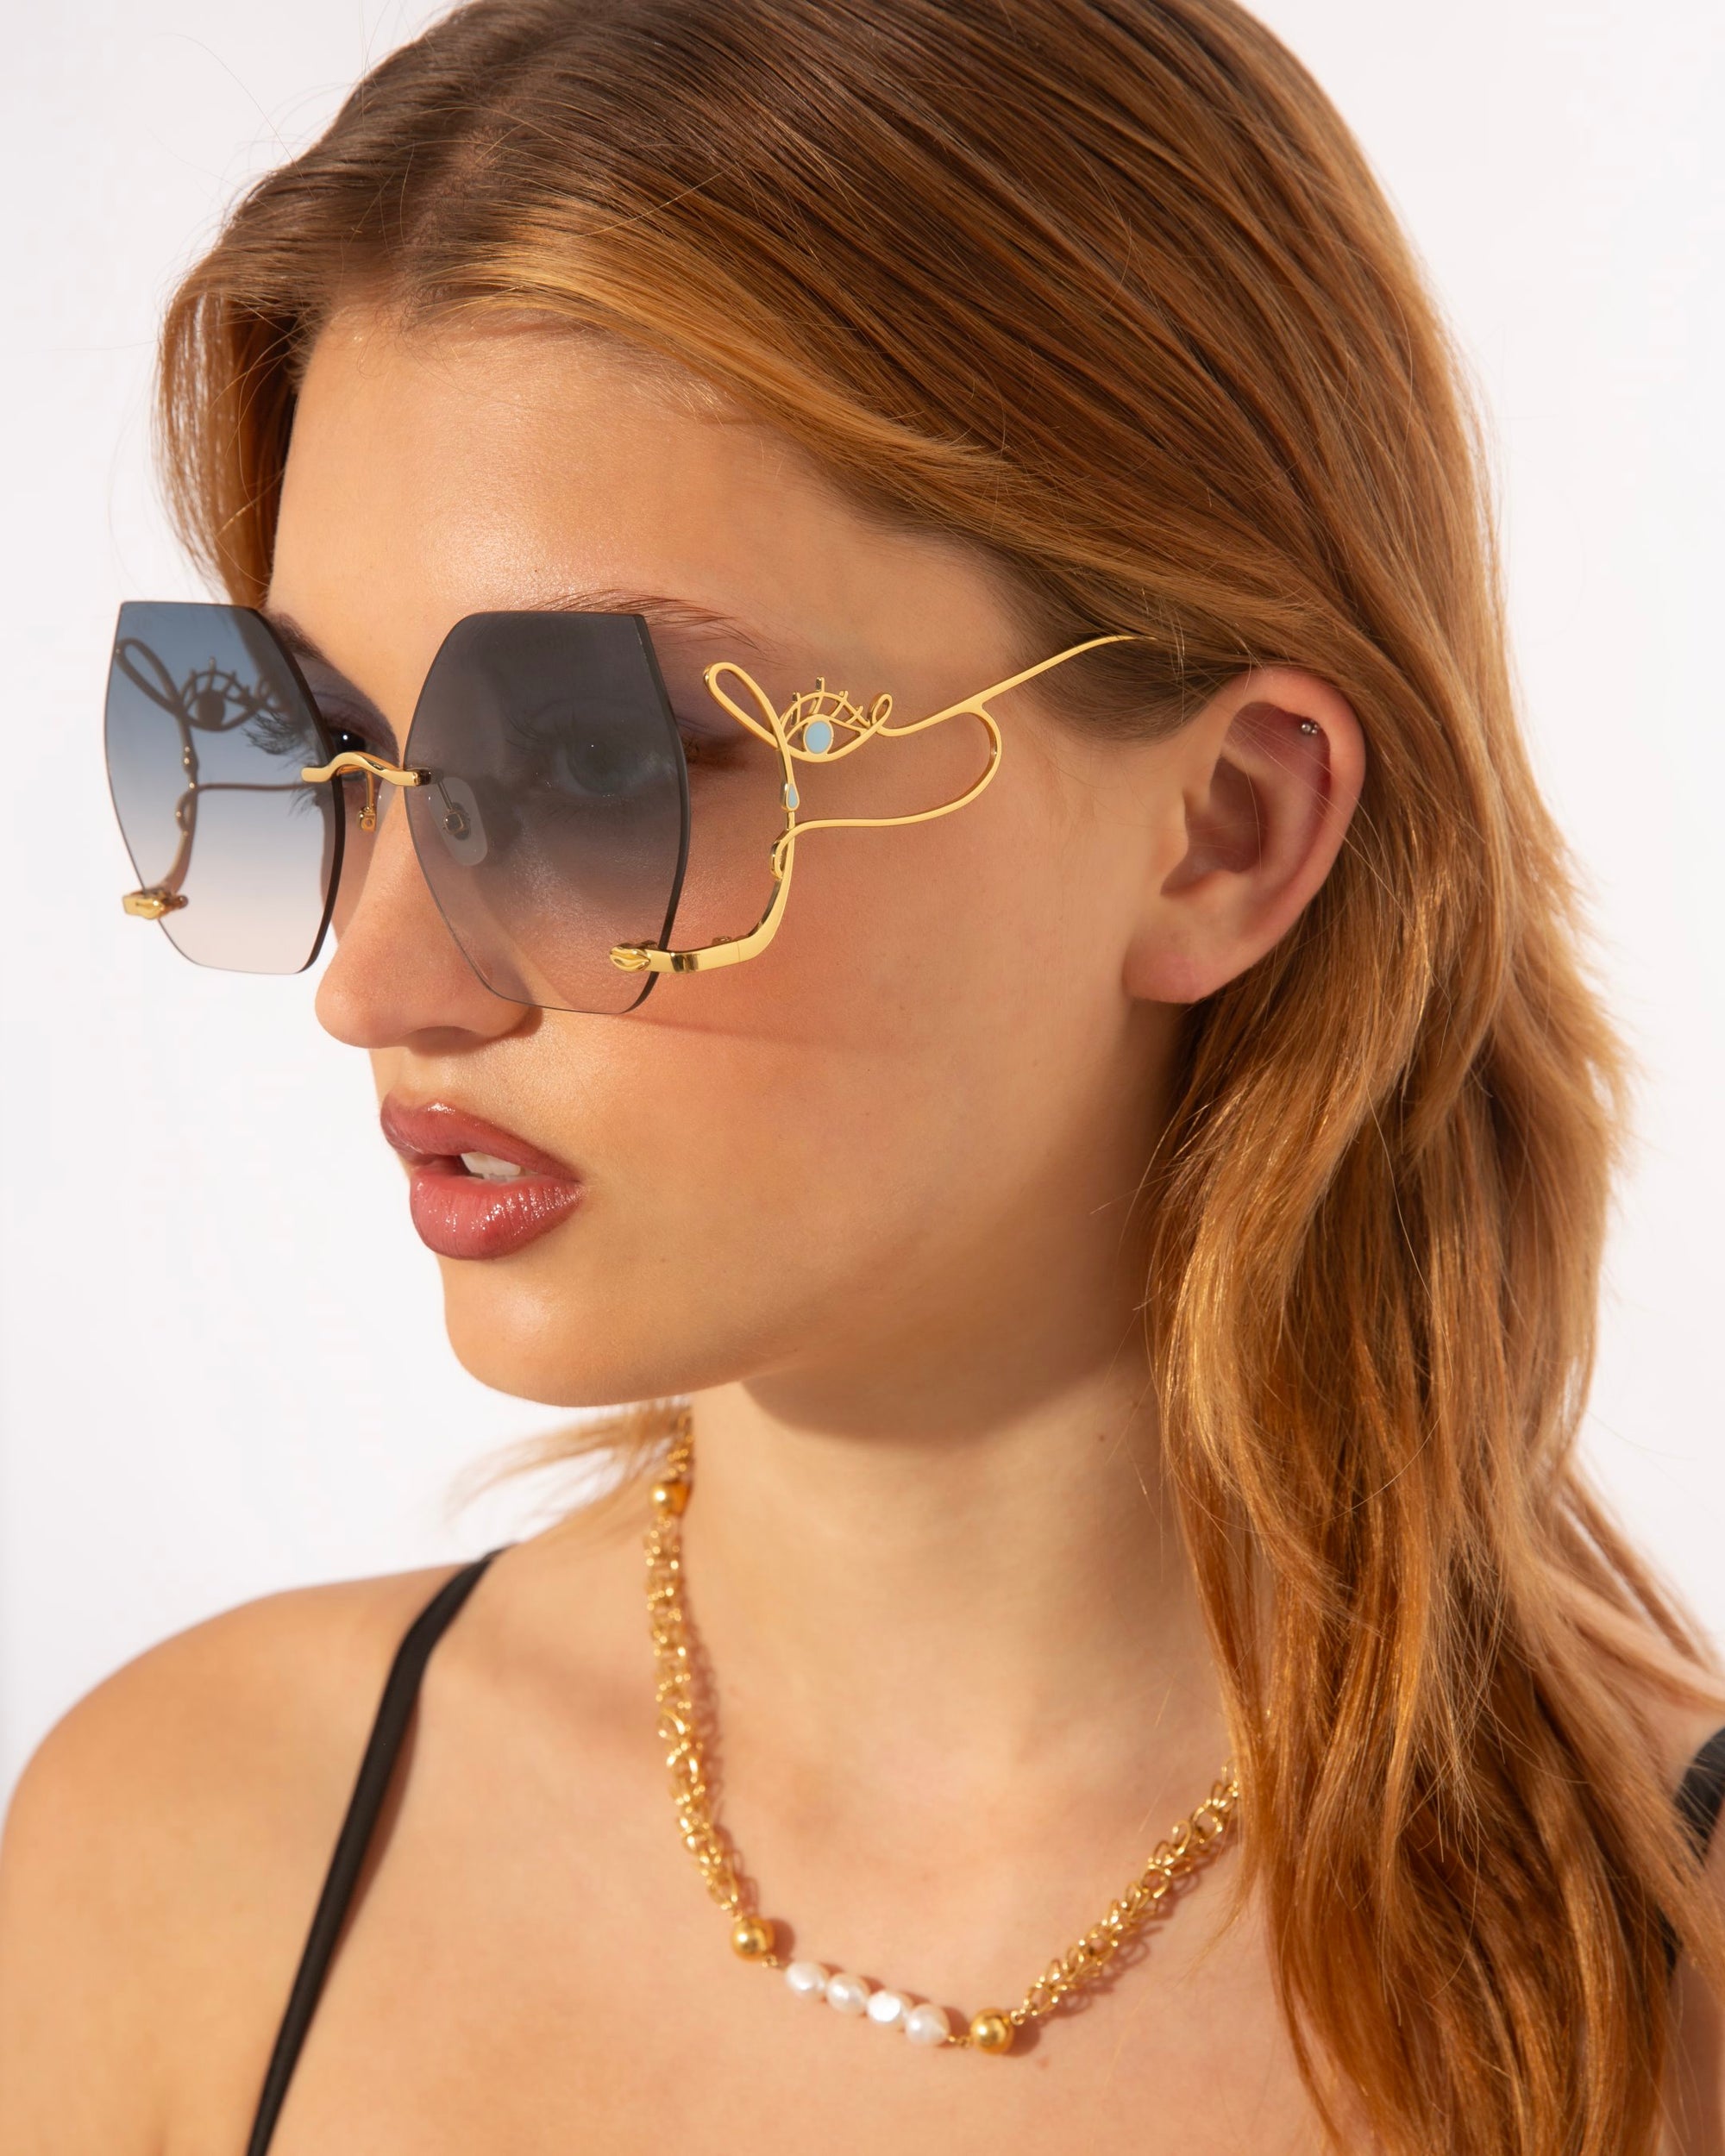 A woman with light brown hair is wearing large, geometric-shaped For Art&#39;s Sake® Cry Me a River statement sunglasses with gradient lenses and decorative gold wire detailing on the frames. She is also wearing a gold chain necklace with pearl accents. The background is plain white.